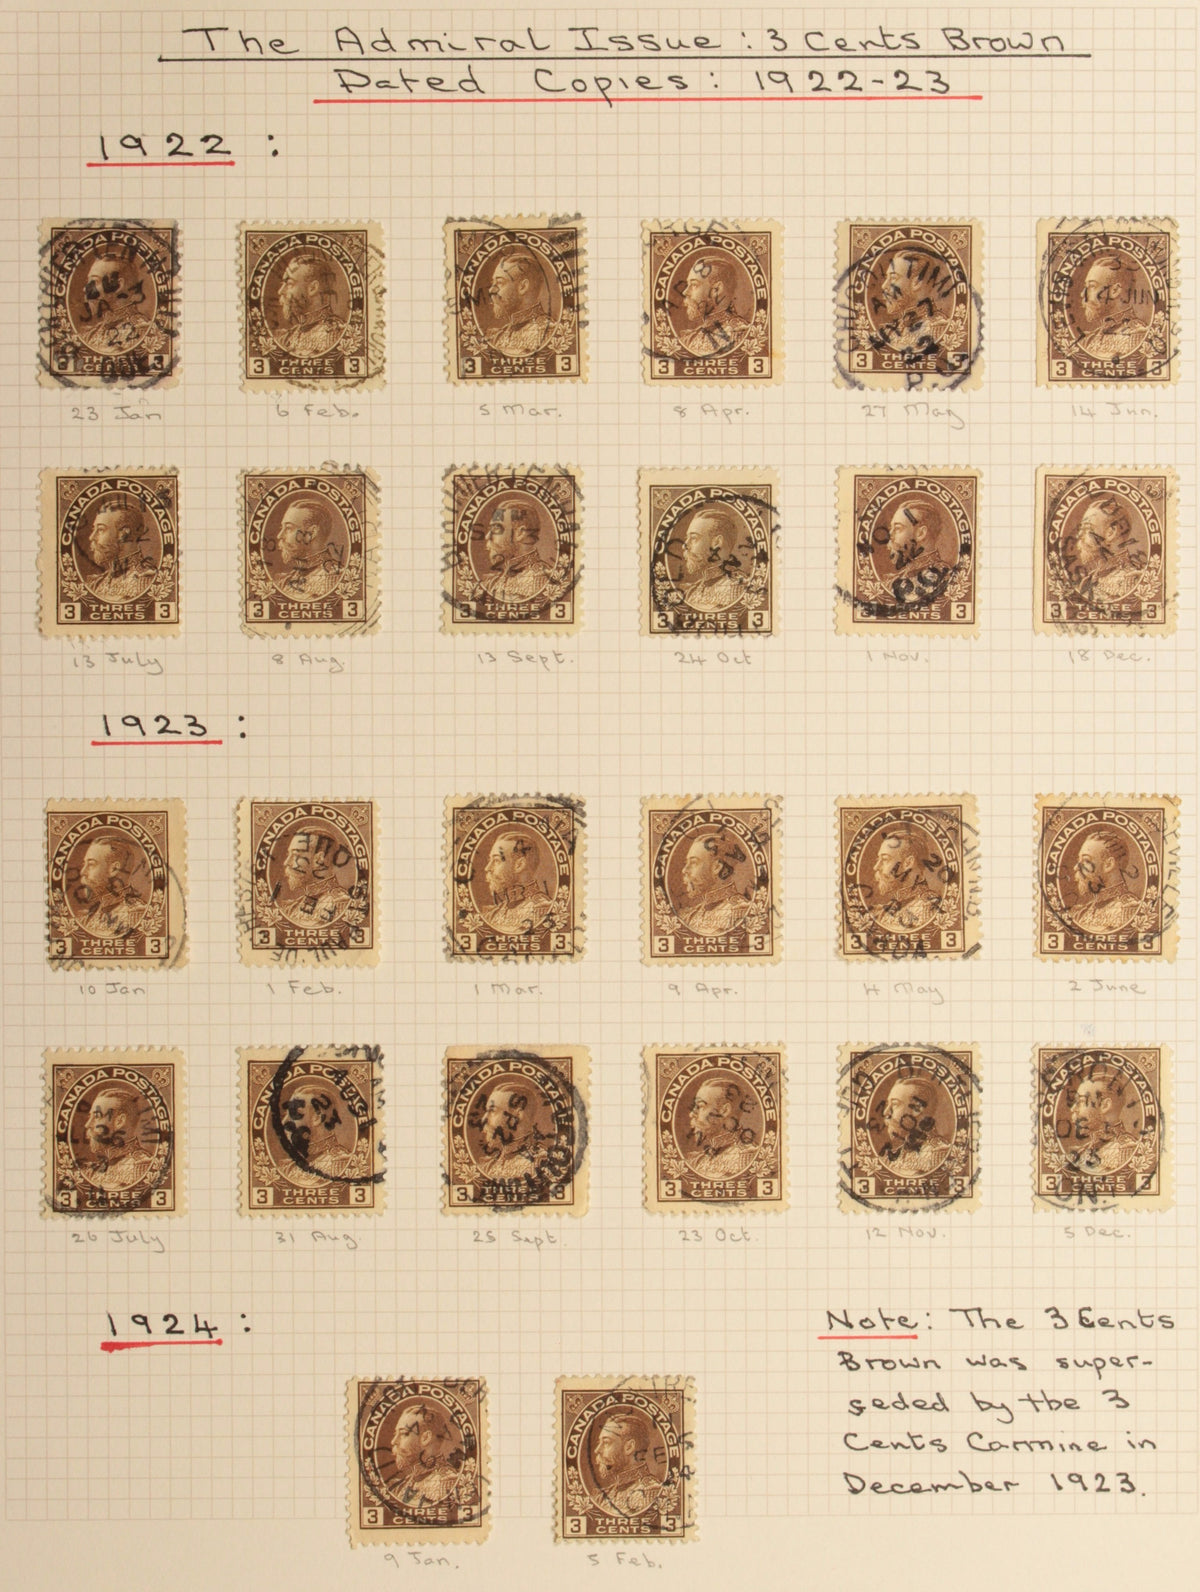 0108CA1710 - #108, 3c brown calendar collection, all dated copies (66)